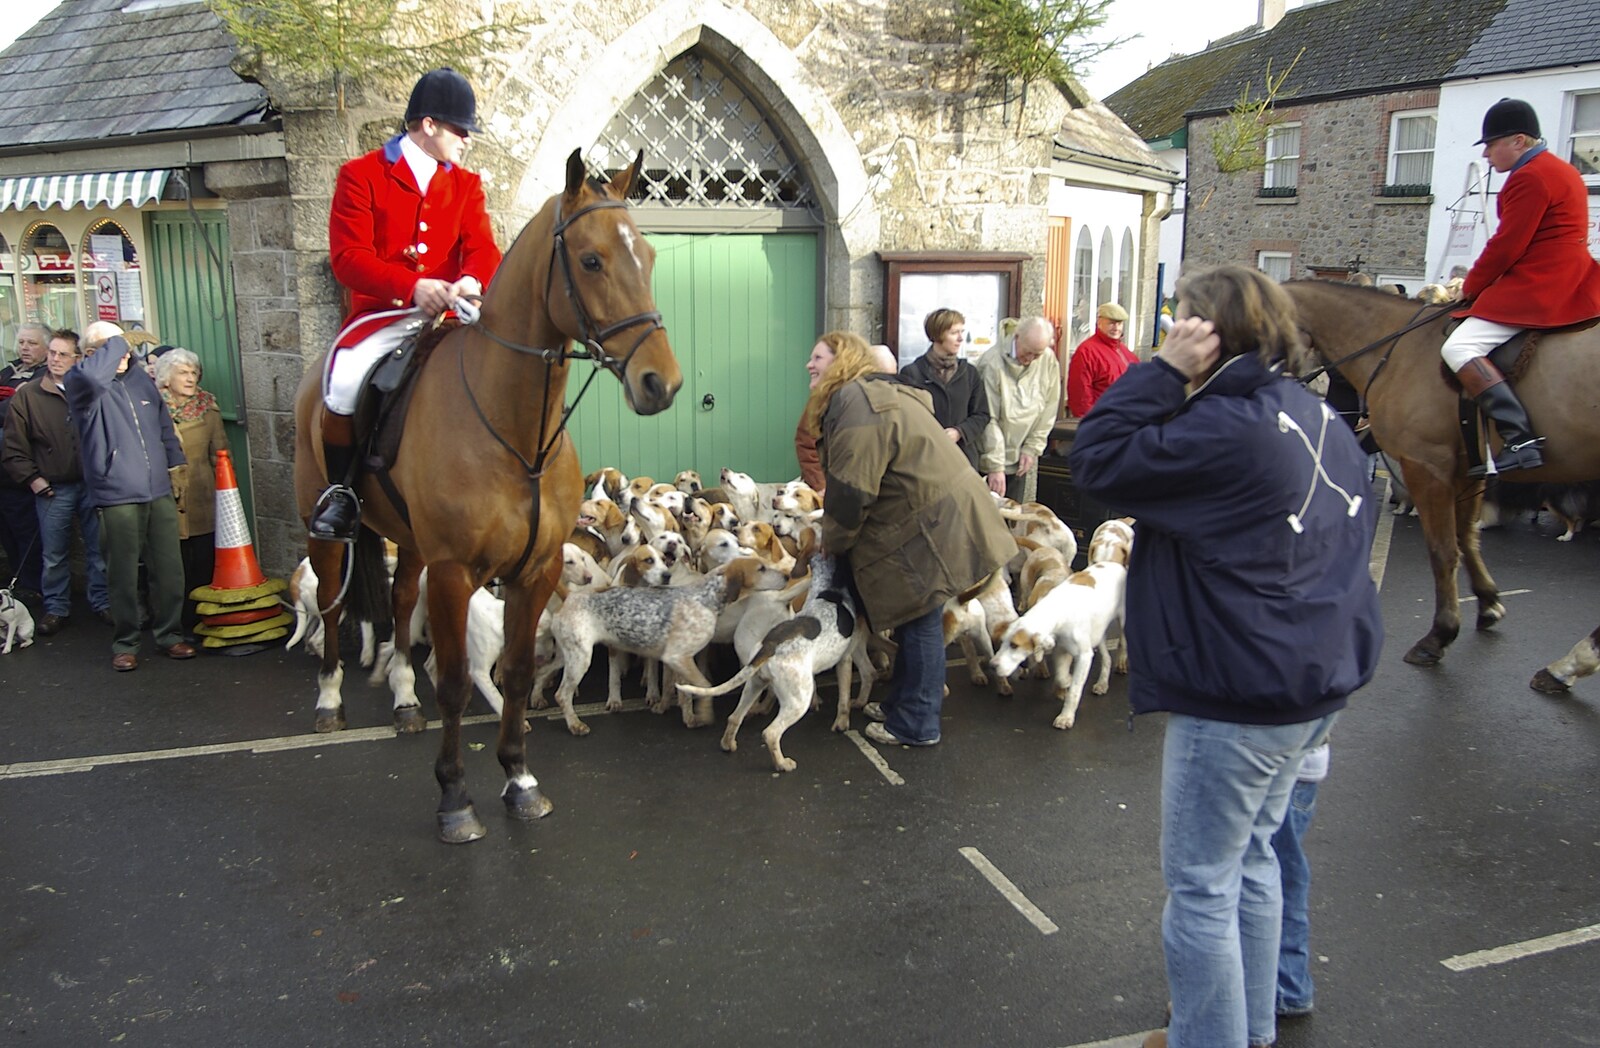 The pack of hounds from A Boxing Day Hunt, Chagford, Devon - 26th December 2007